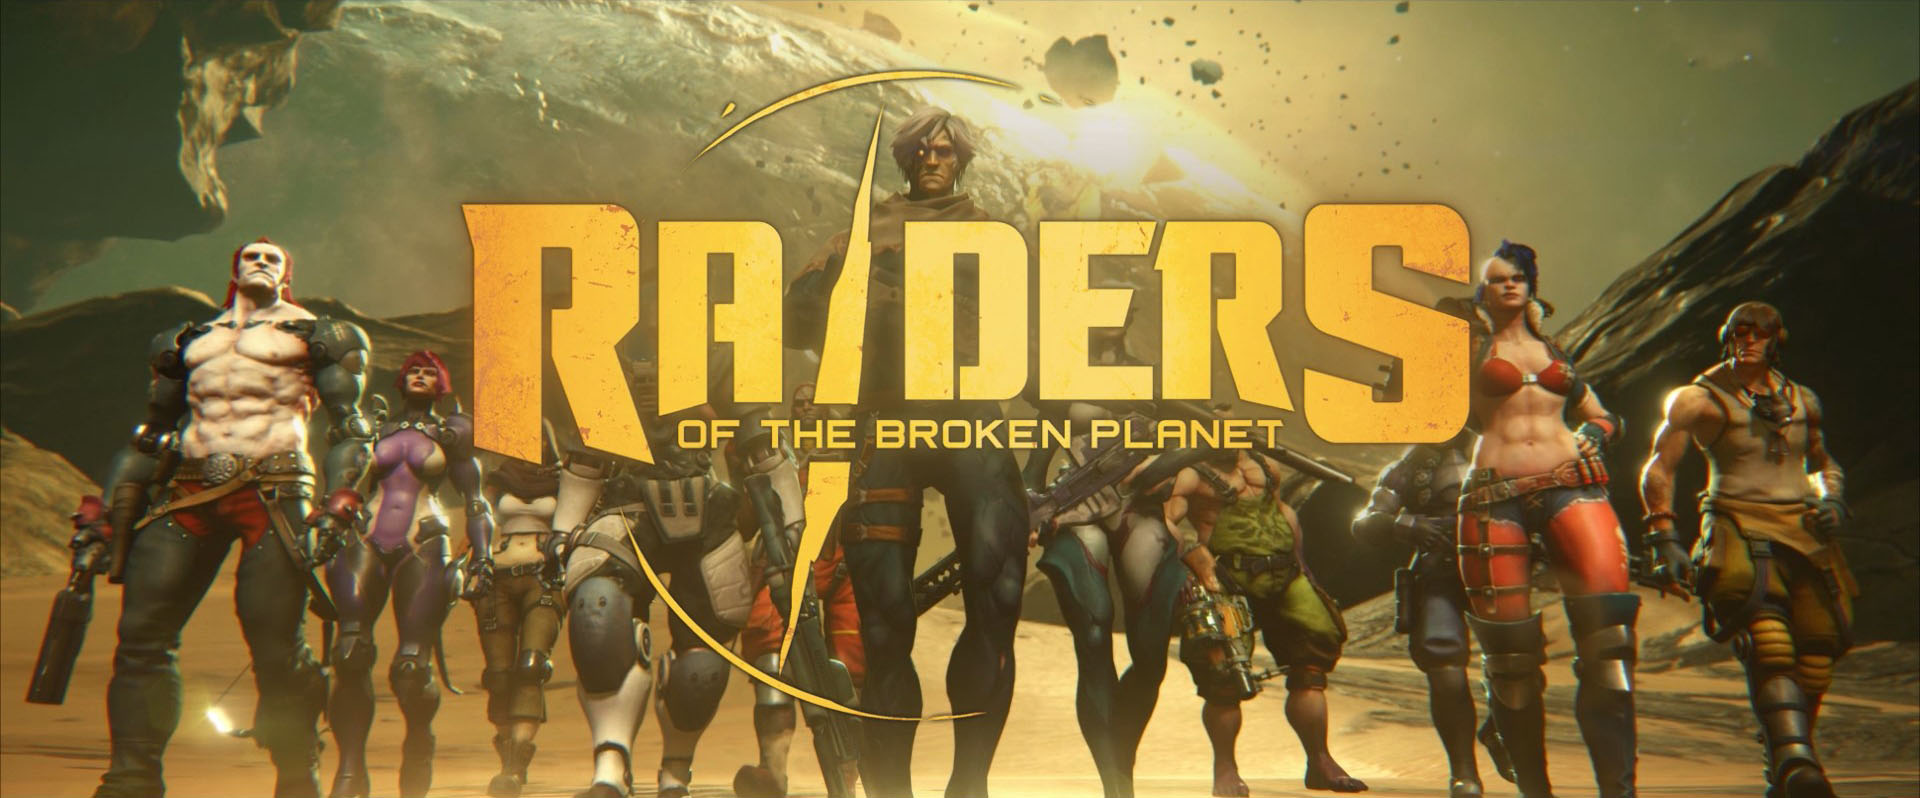 Raiders Of The Broken Planet Preview Title Team Image